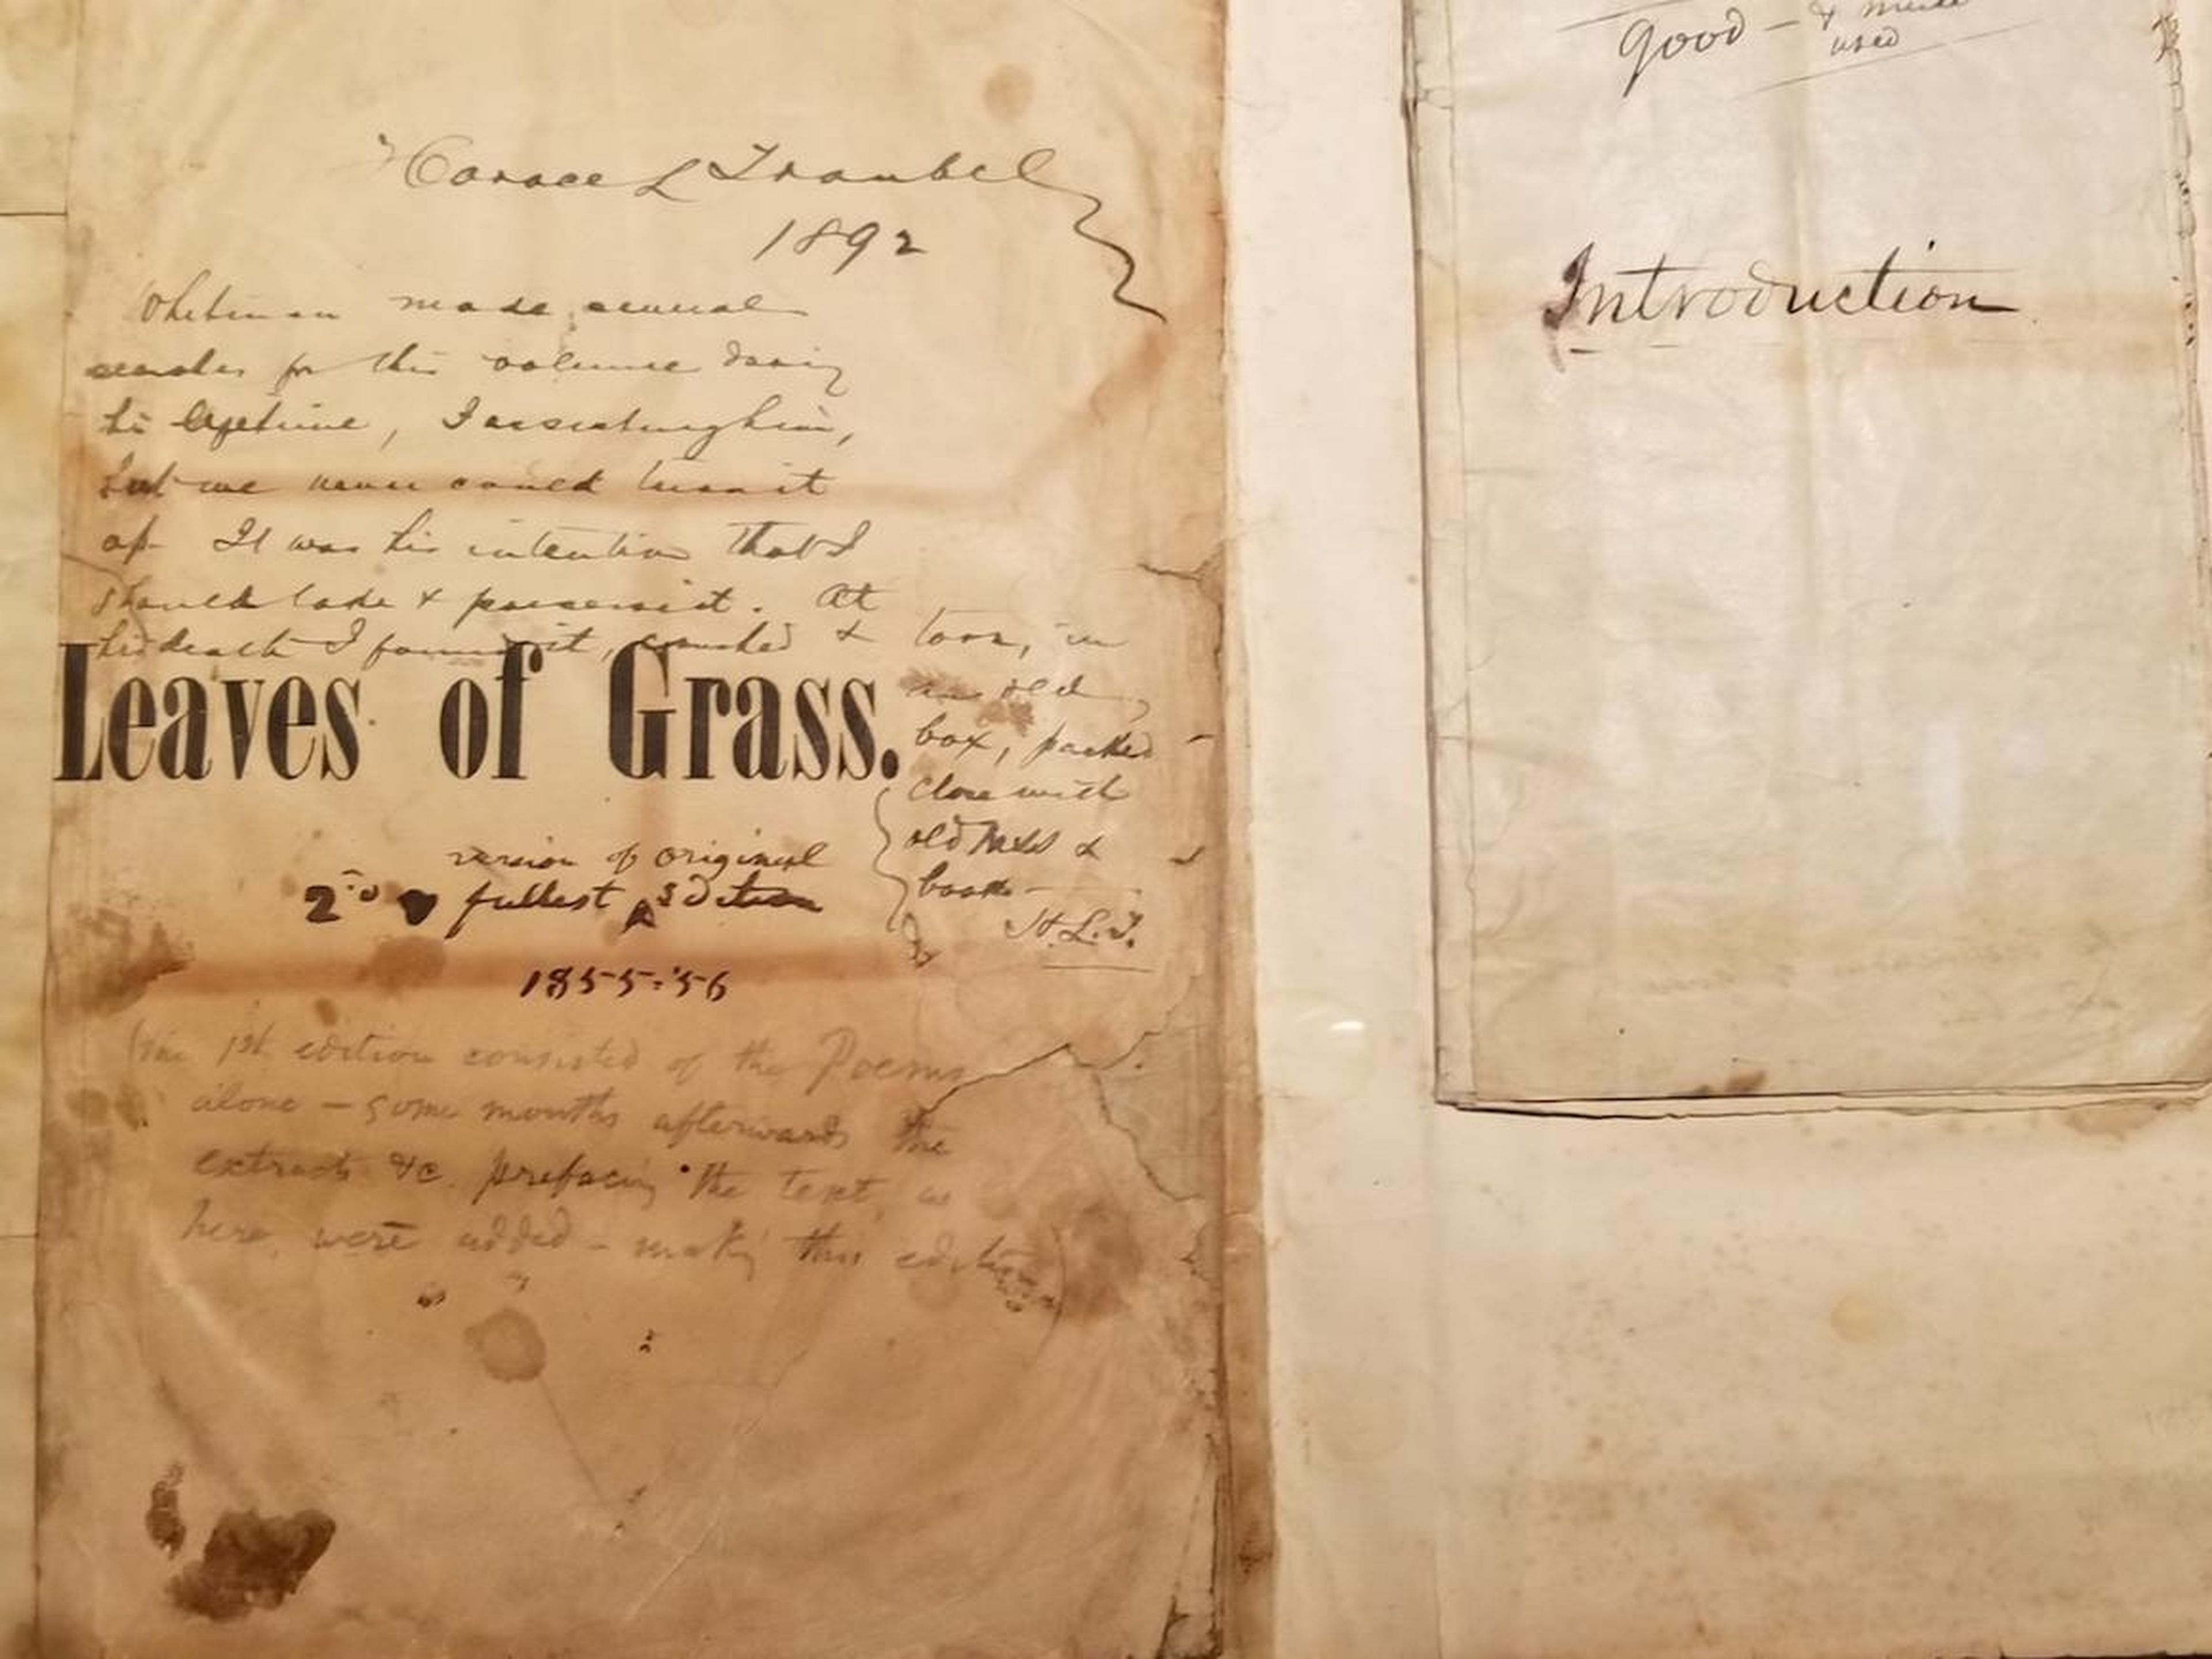 Walt Whitman's personal copy of "Leaves of Grass."